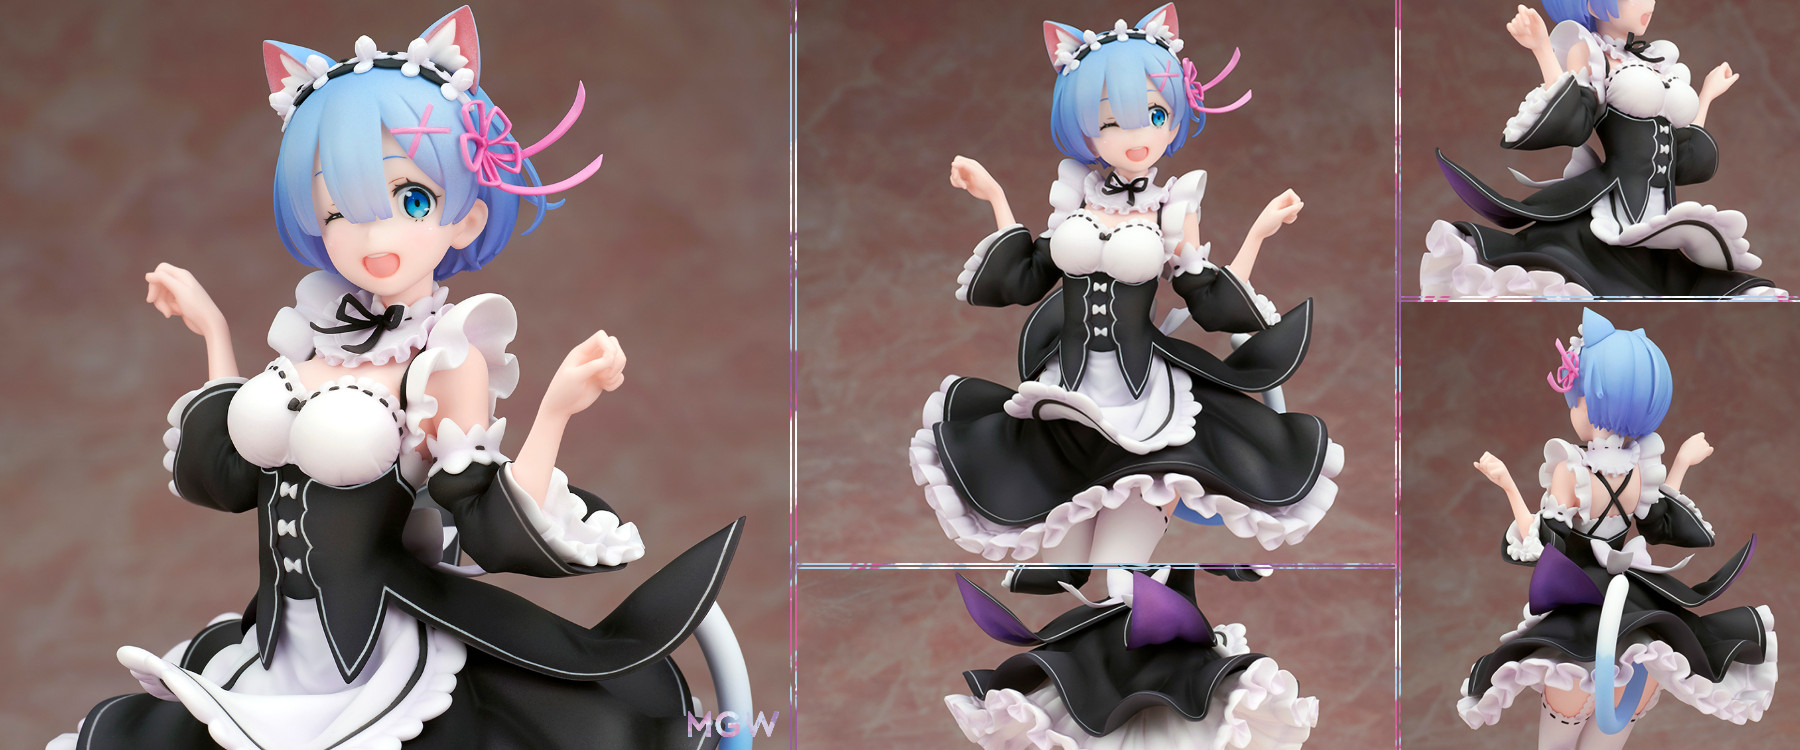 Rem Nekomimi ver. by ALPHA×OMEGA from Re:ZERO Starting Life in Another World MGW Header